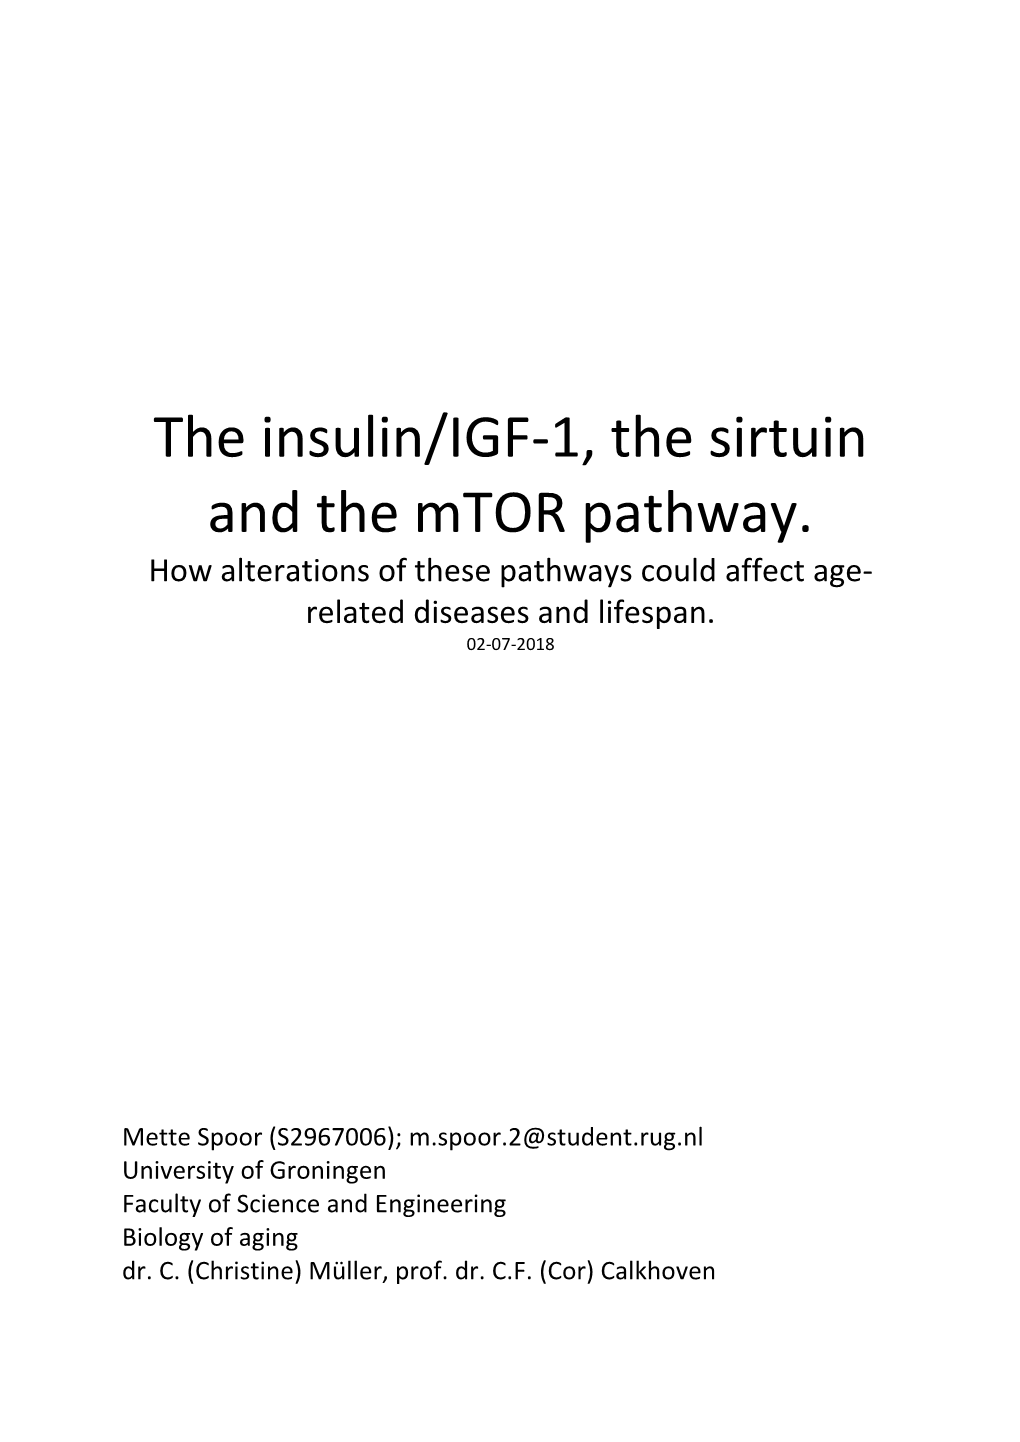 The Insulin/IGF-1, the Sirtuin and the Mtor Pathway. How Alterations of These Pathways Could Affect Age- Related Diseases and Lifespan